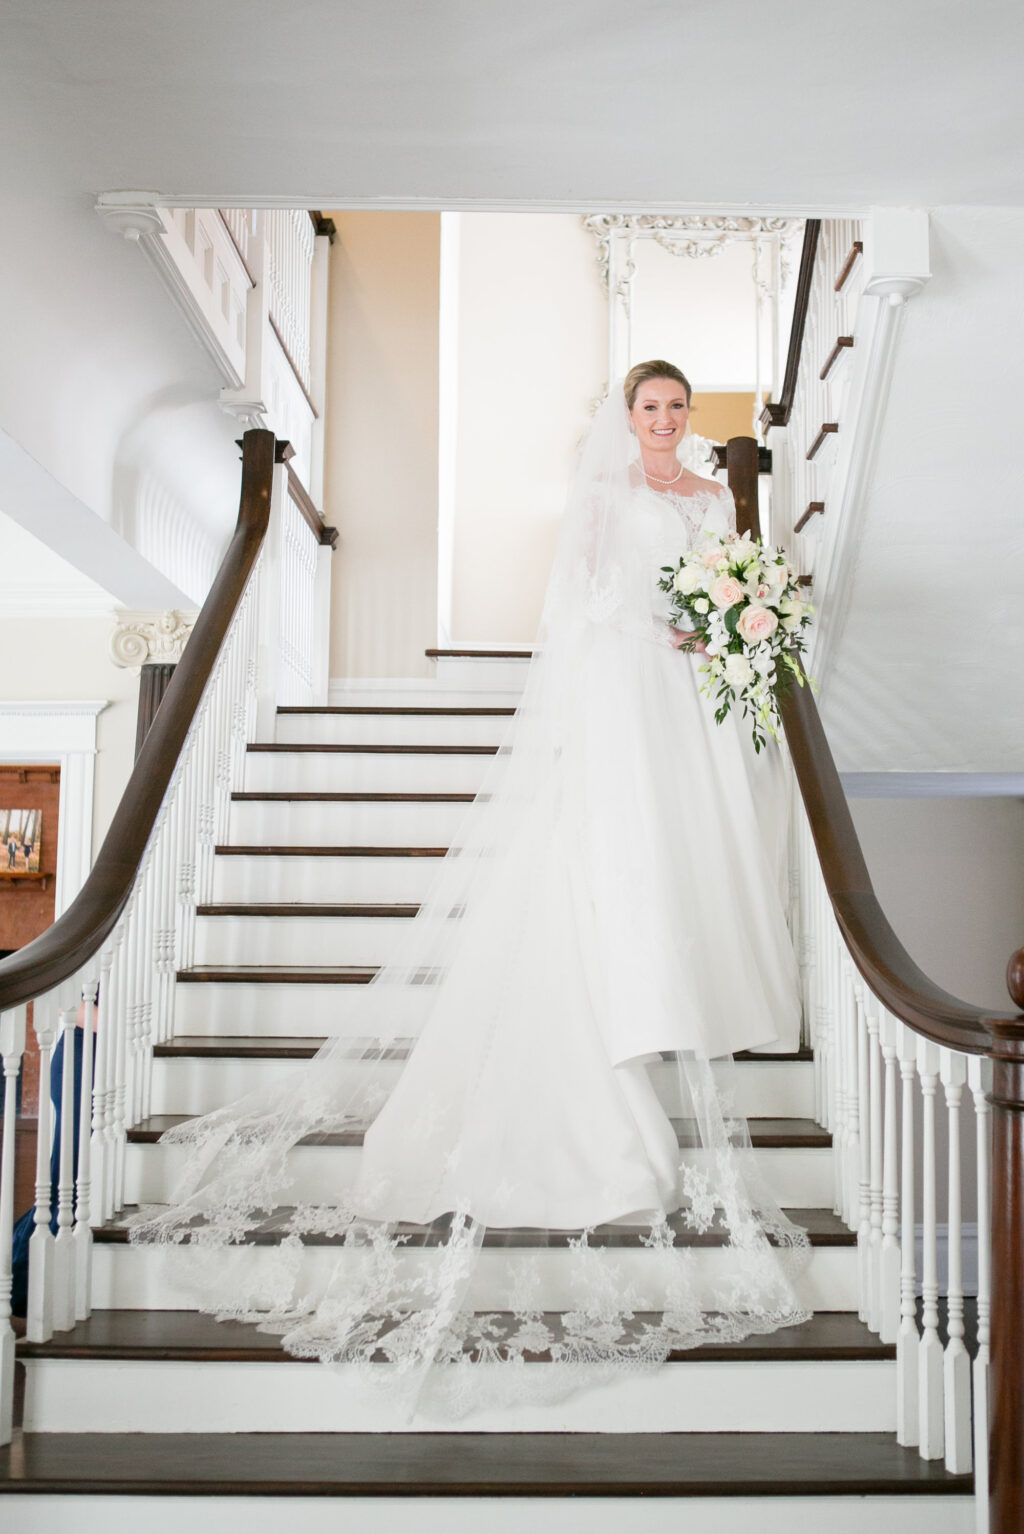 Ivory A-Line Wedding Dress with Off-the-shoulder Lace Long-sleeve Overlay Inspiration | Chapel Length Lace Veil Ideas | Tampa Bay Boutique Truly Forever Bridal | Photographer Carrie Wildes Photography